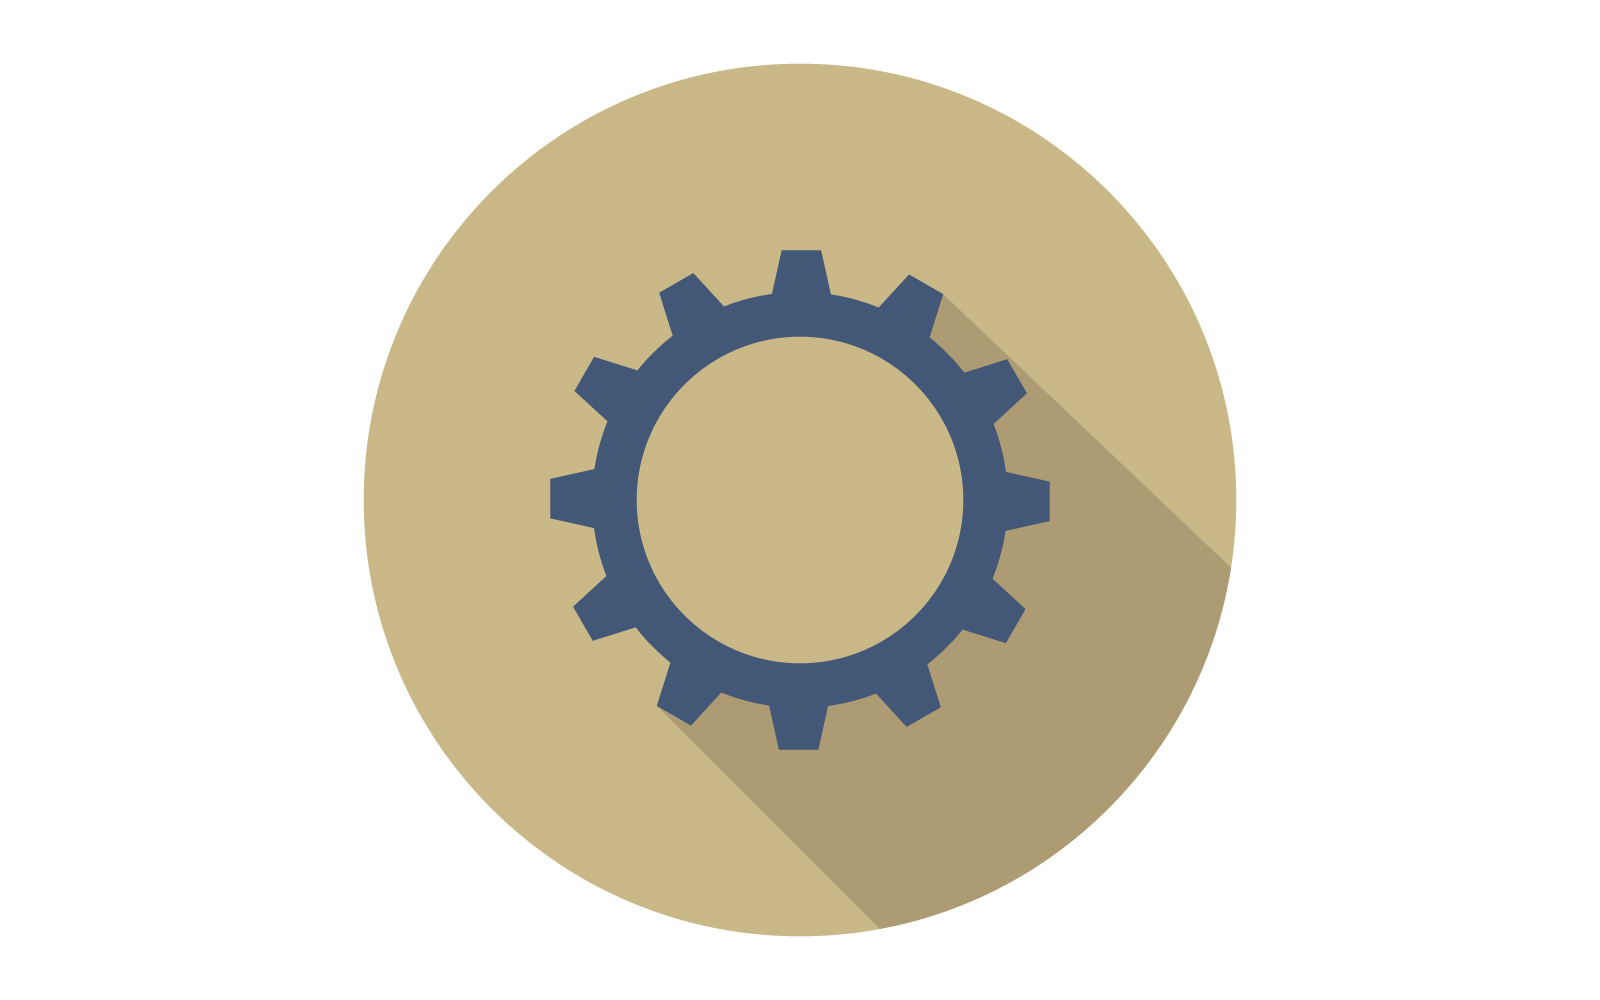 Gear illustrated on a white background and colored in vector